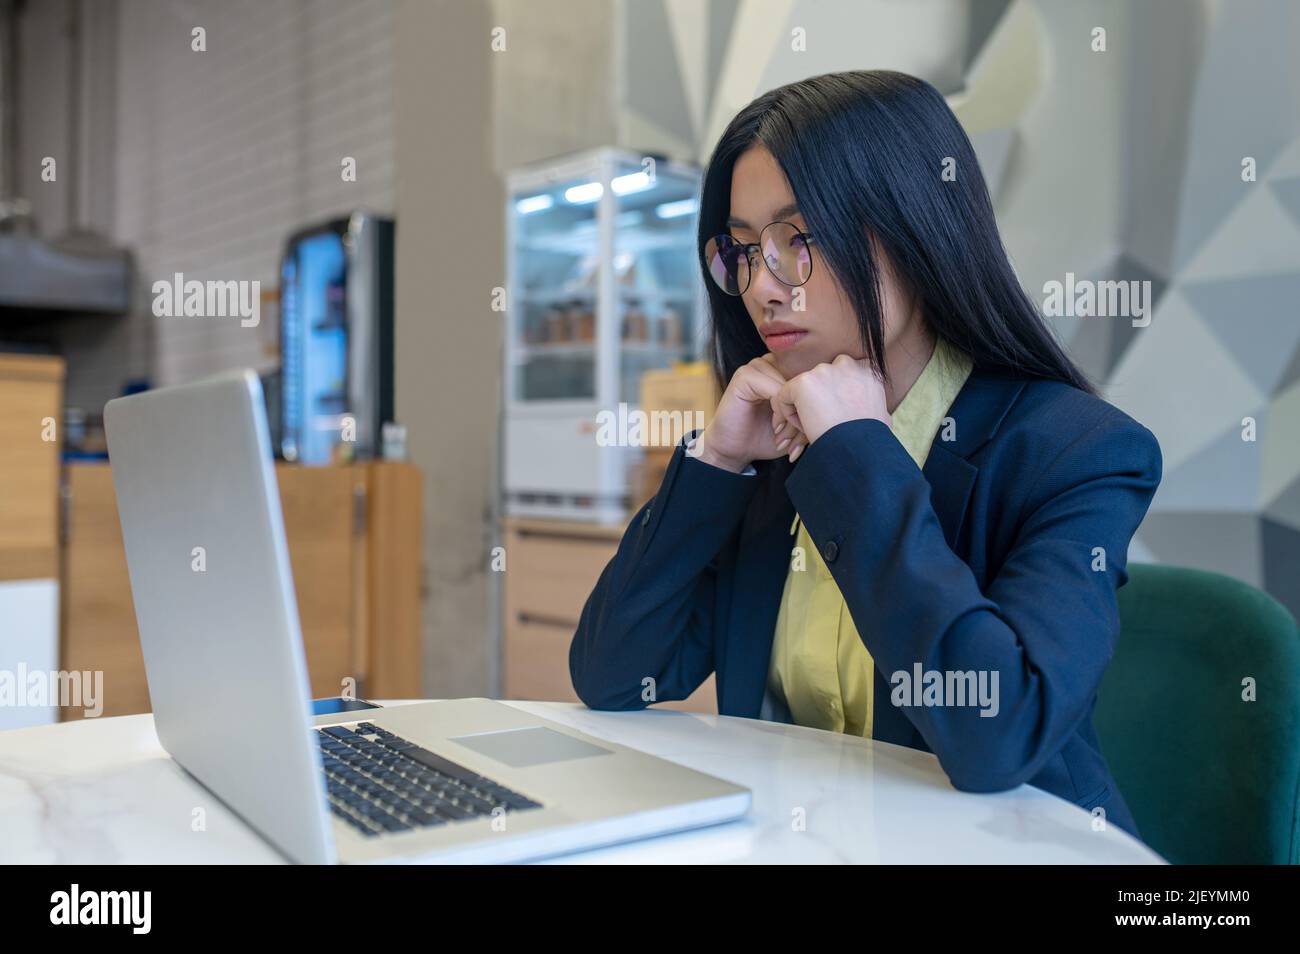 Woman looking at laptop sitting working in office Stock Photo